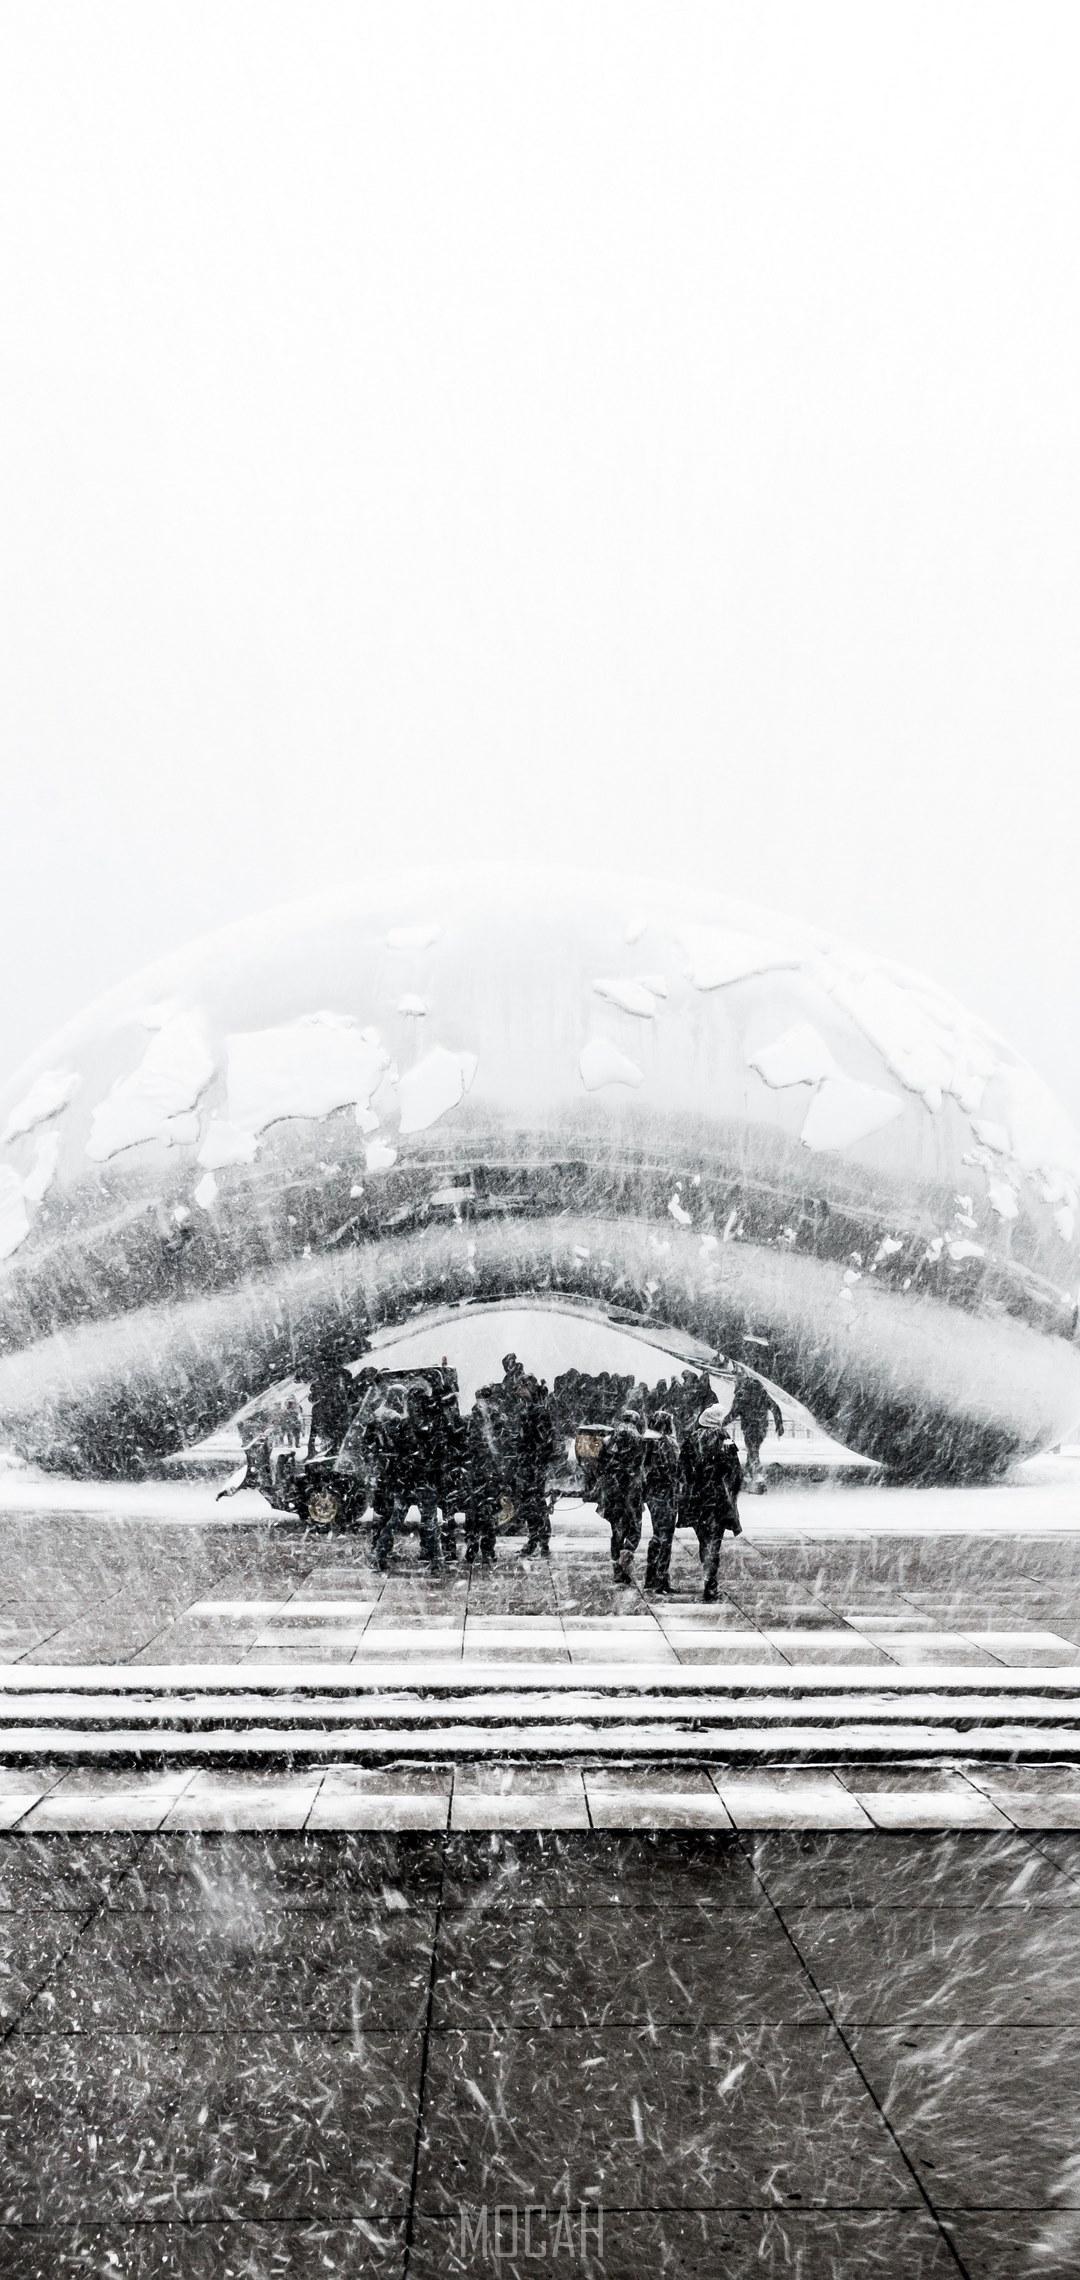 HD wallpaper, The Bean Snowy In March, Sharp Aquos R2 Compact Wallpaper Hd Download, 1080X2280, Black And White Shot Of Group Of People Standing Near Modern Sculpture In Heavy Snow Chicago